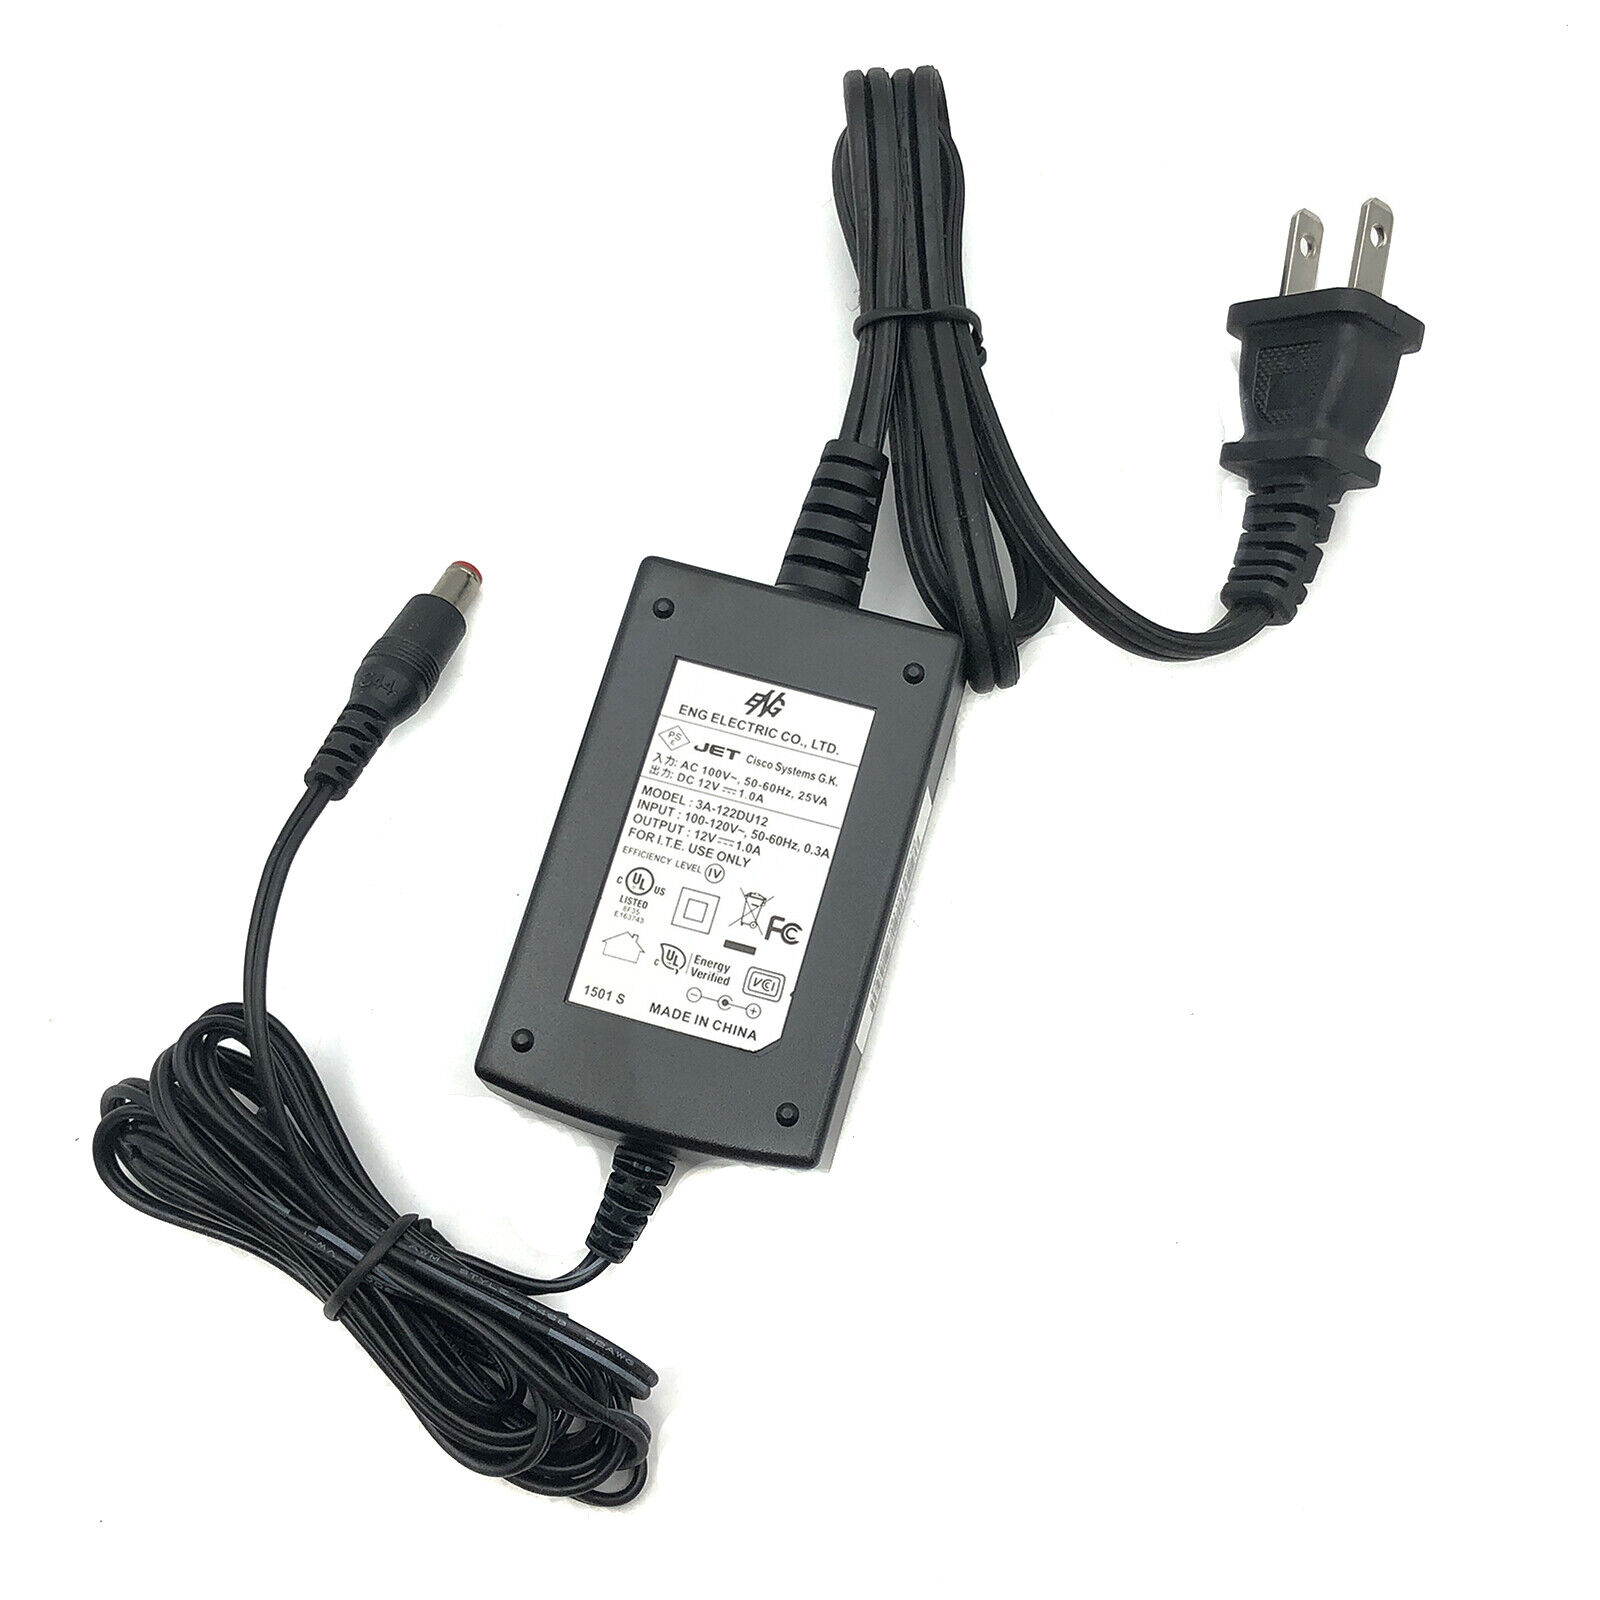 Genuine ENG AC/DC Power Adapter for Cisco Linksys Wireless Wi-Fi Router E2000